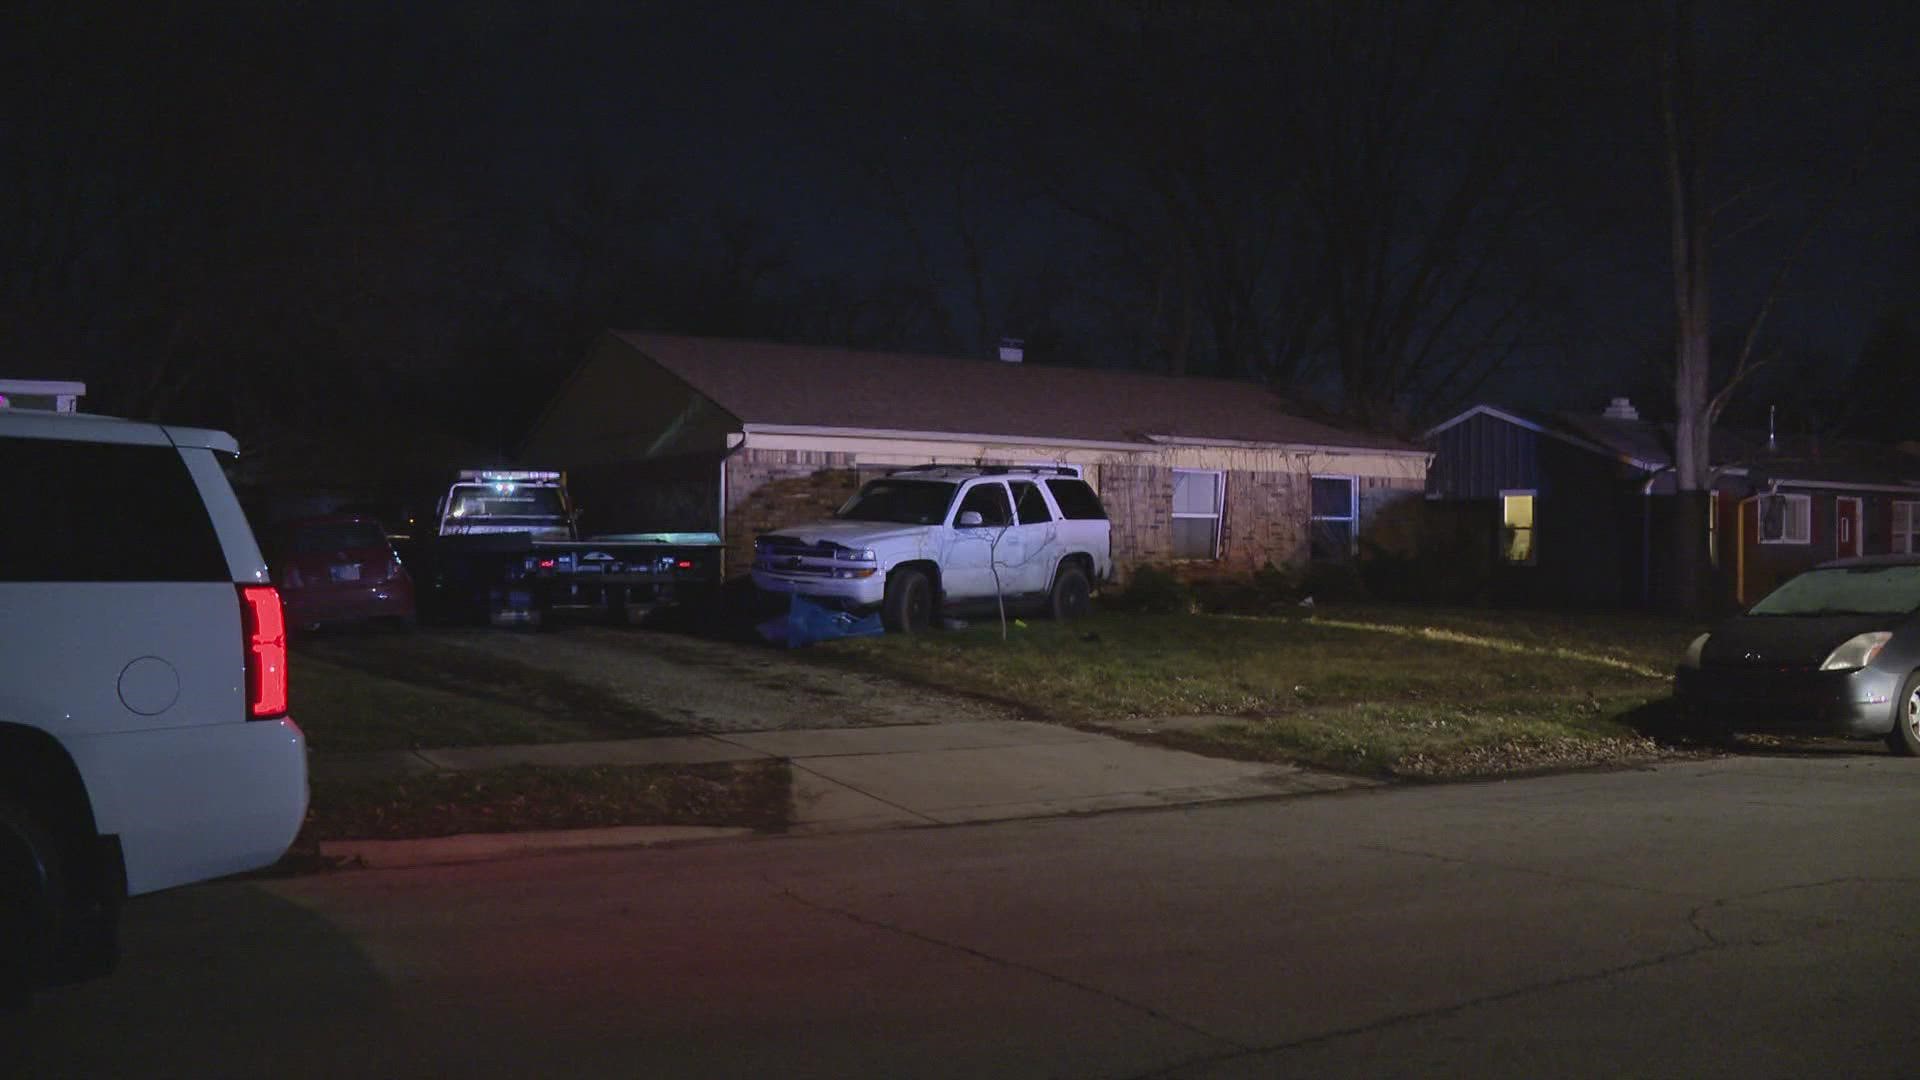 A short pursuit ended Friday evening when an SUV struck a house in Lawrence.